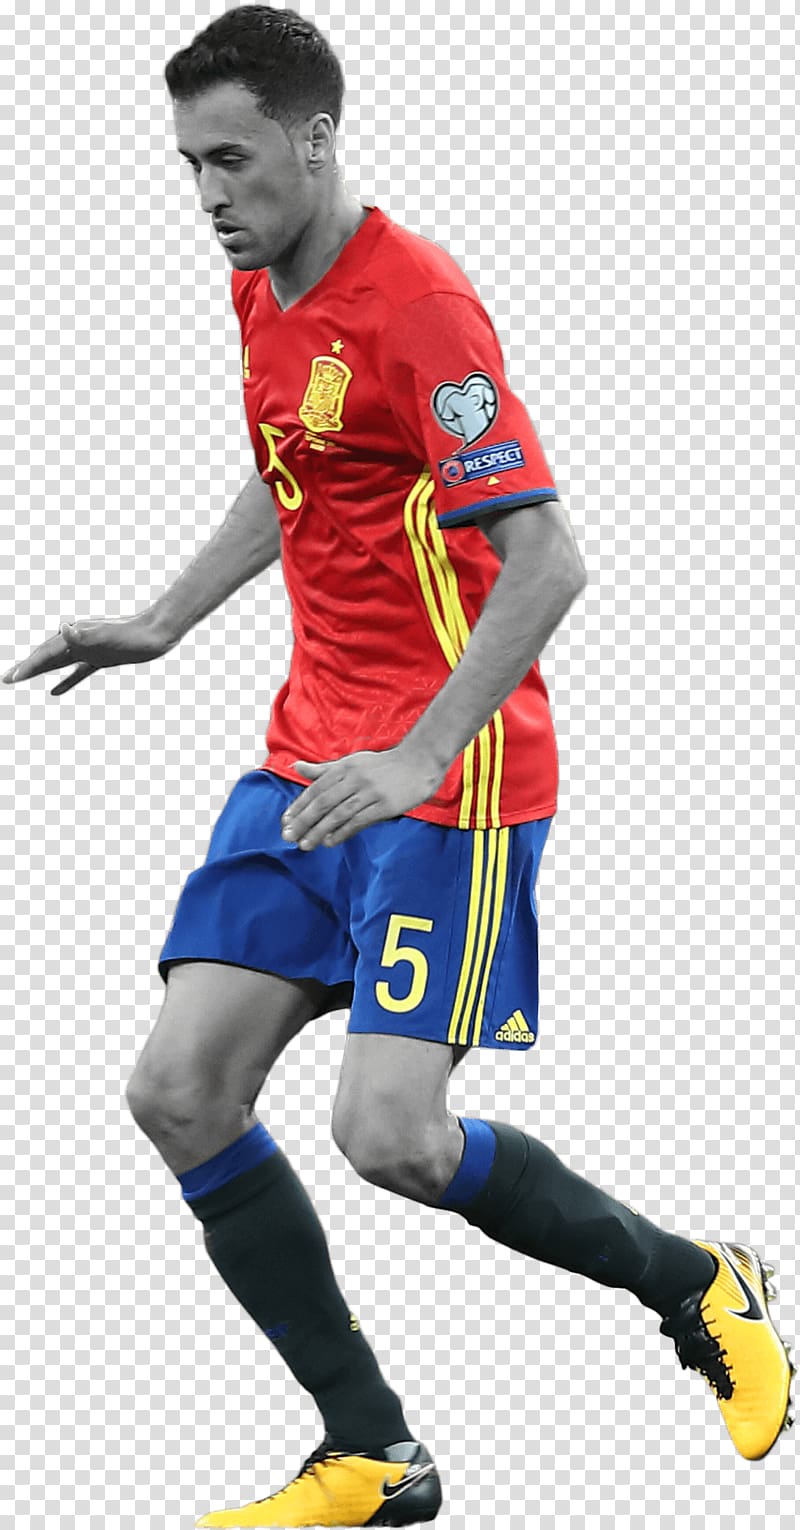 Spain Team sport Jersey Champions, Busquets transparent background PNG clipart